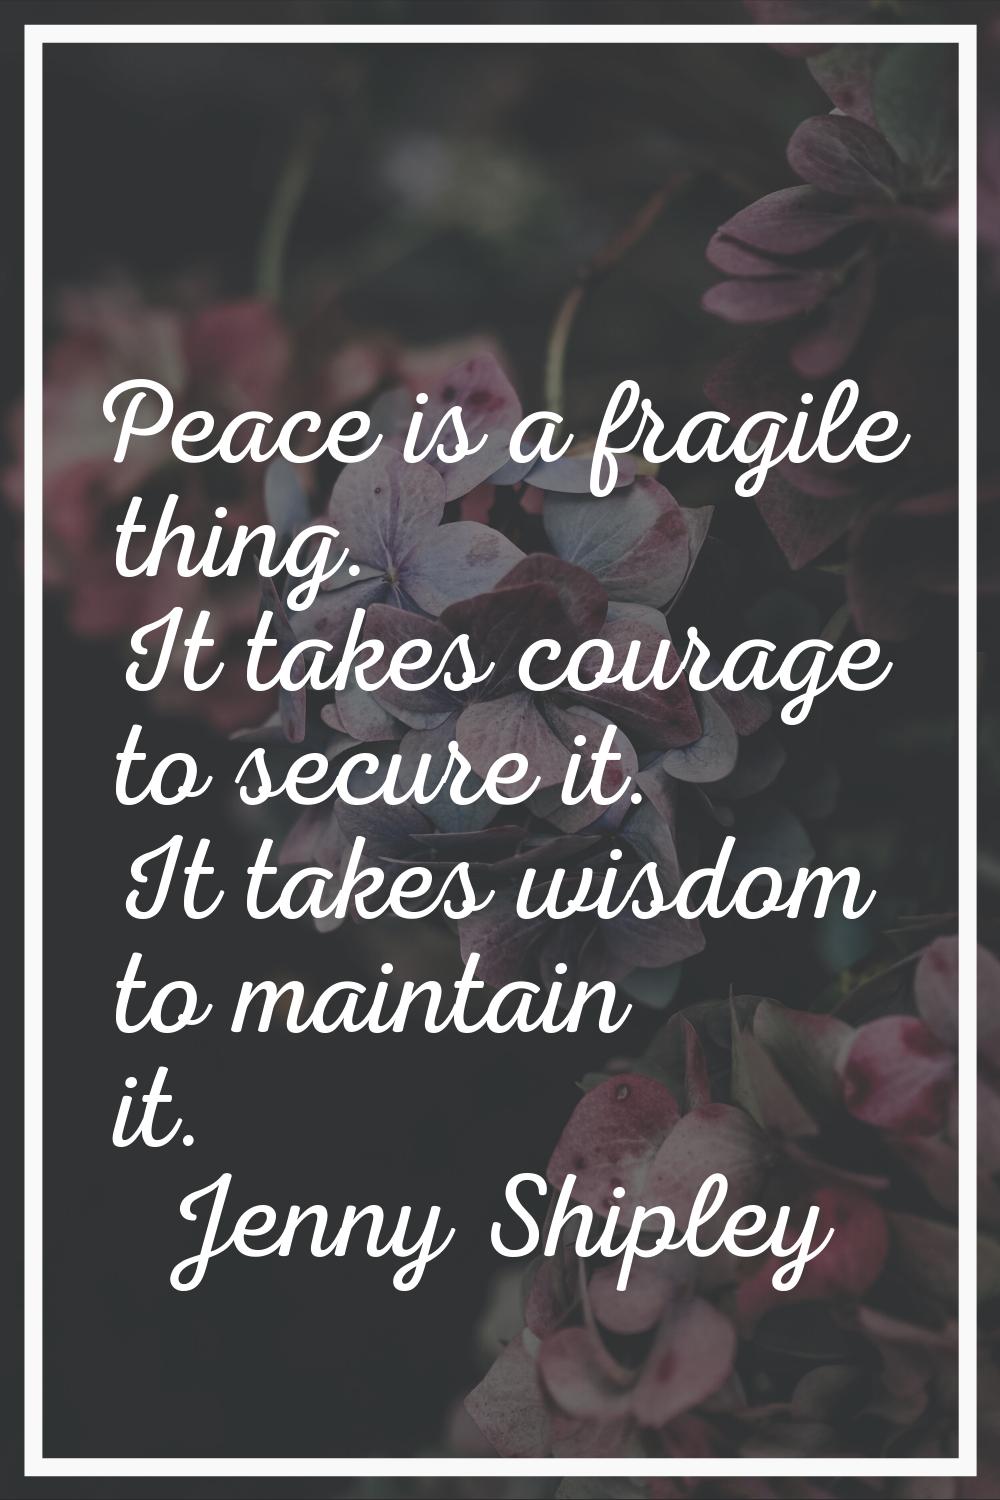 Peace is a fragile thing. It takes courage to secure it. It takes wisdom to maintain it.